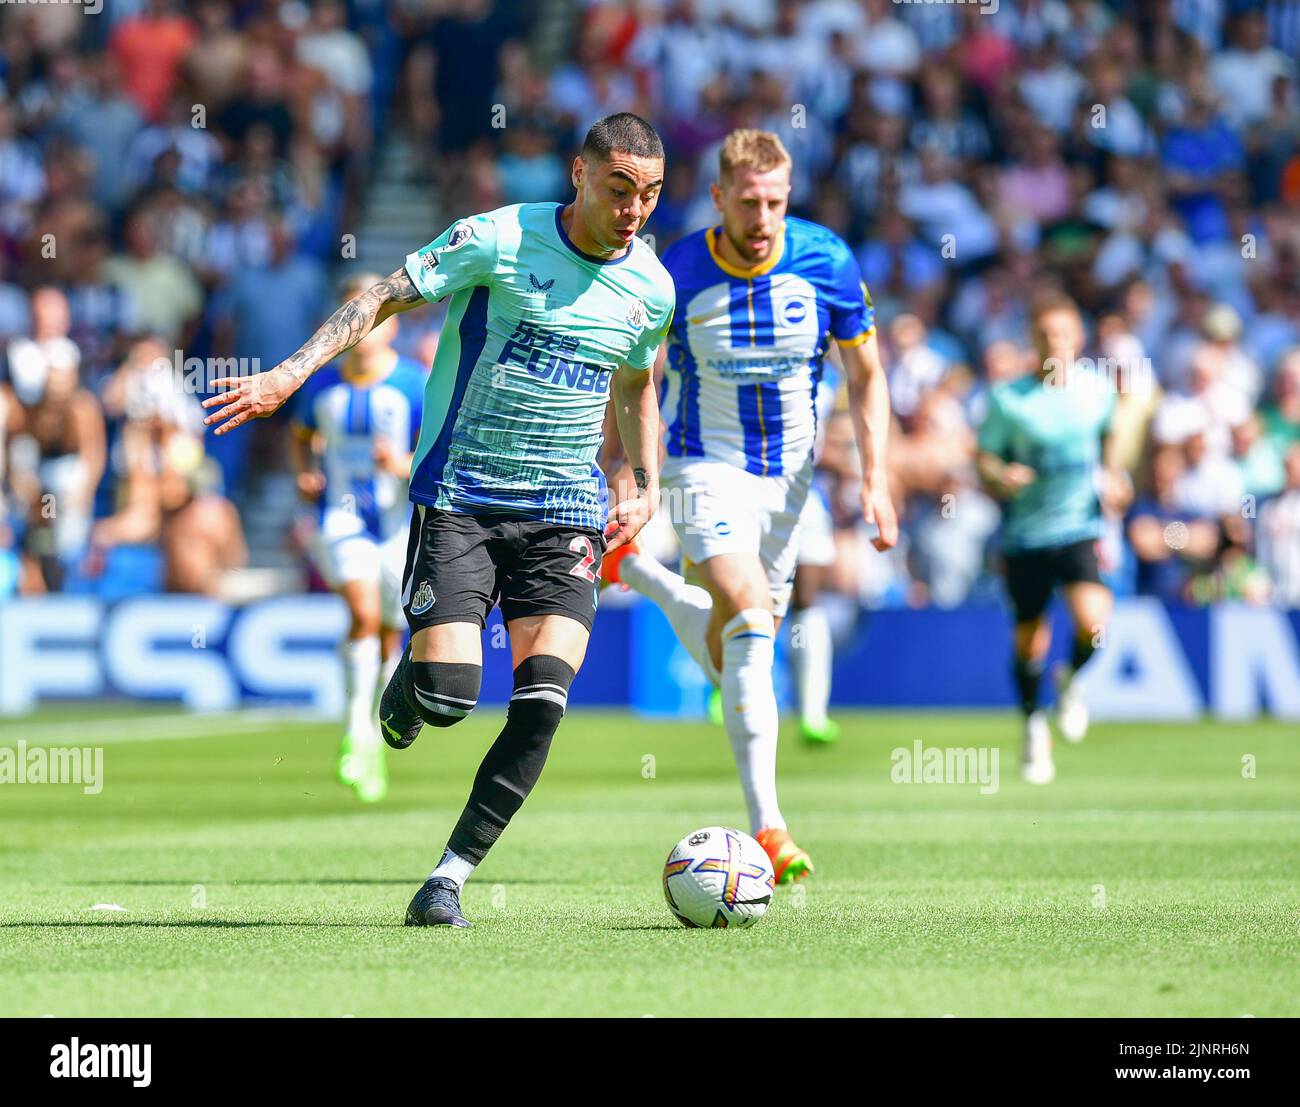 Brighton, UK. 13th Aug, 2022. Miguel Almiron of Newcastle United during the Premier League match between Brighton & Hove Albion and Newcastle United at The Amex on August 13th 2022 in Brighton, England. (Photo by Jeff Mood/phcimages.com) Credit: PHC Images/Alamy Live News Stock Photo